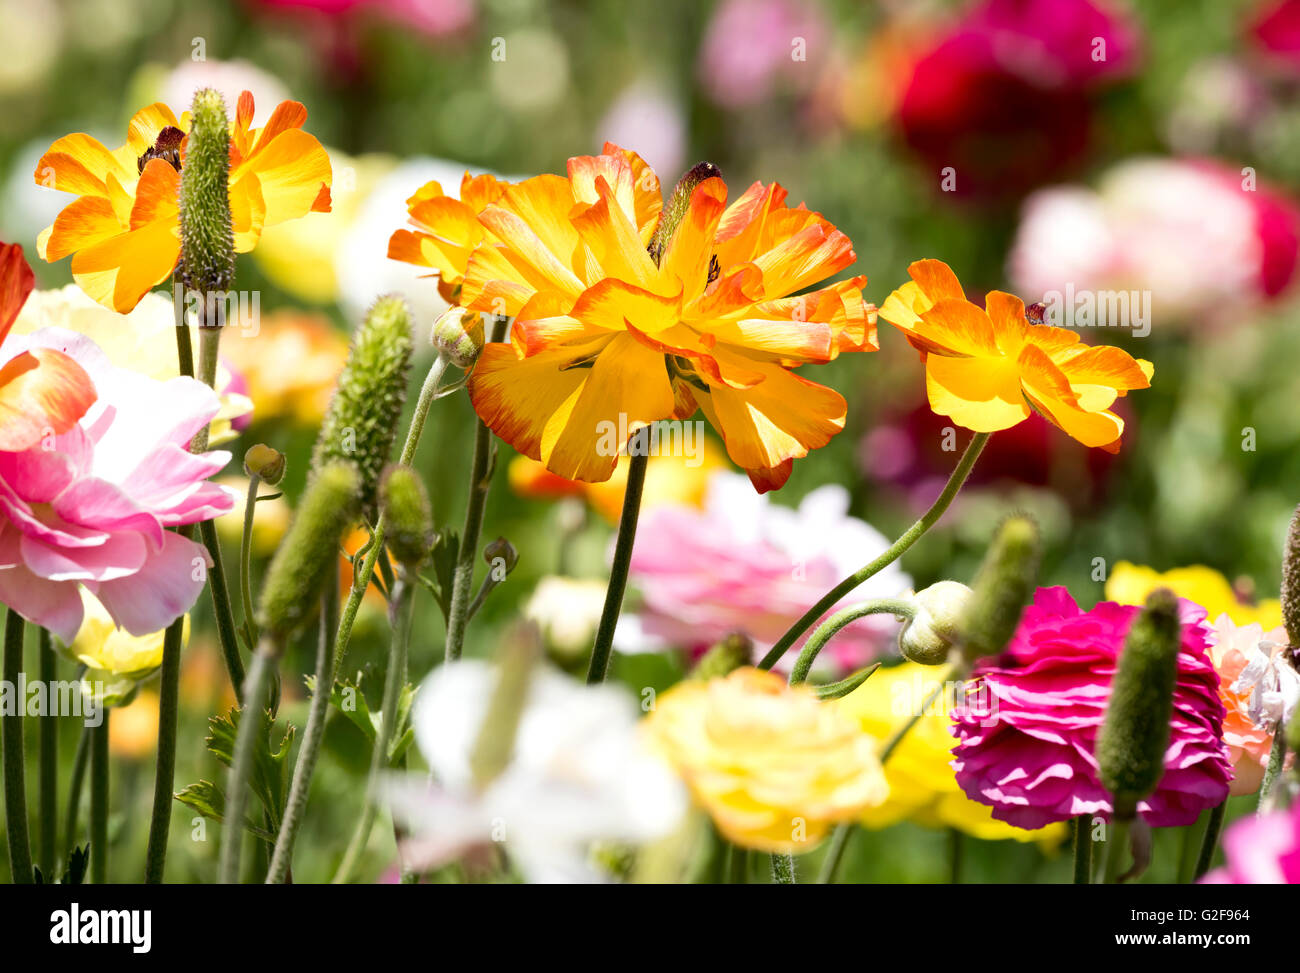 An orange and yellow ranunculus flower framed against a background of colorful buds and greenery. Stock Photo